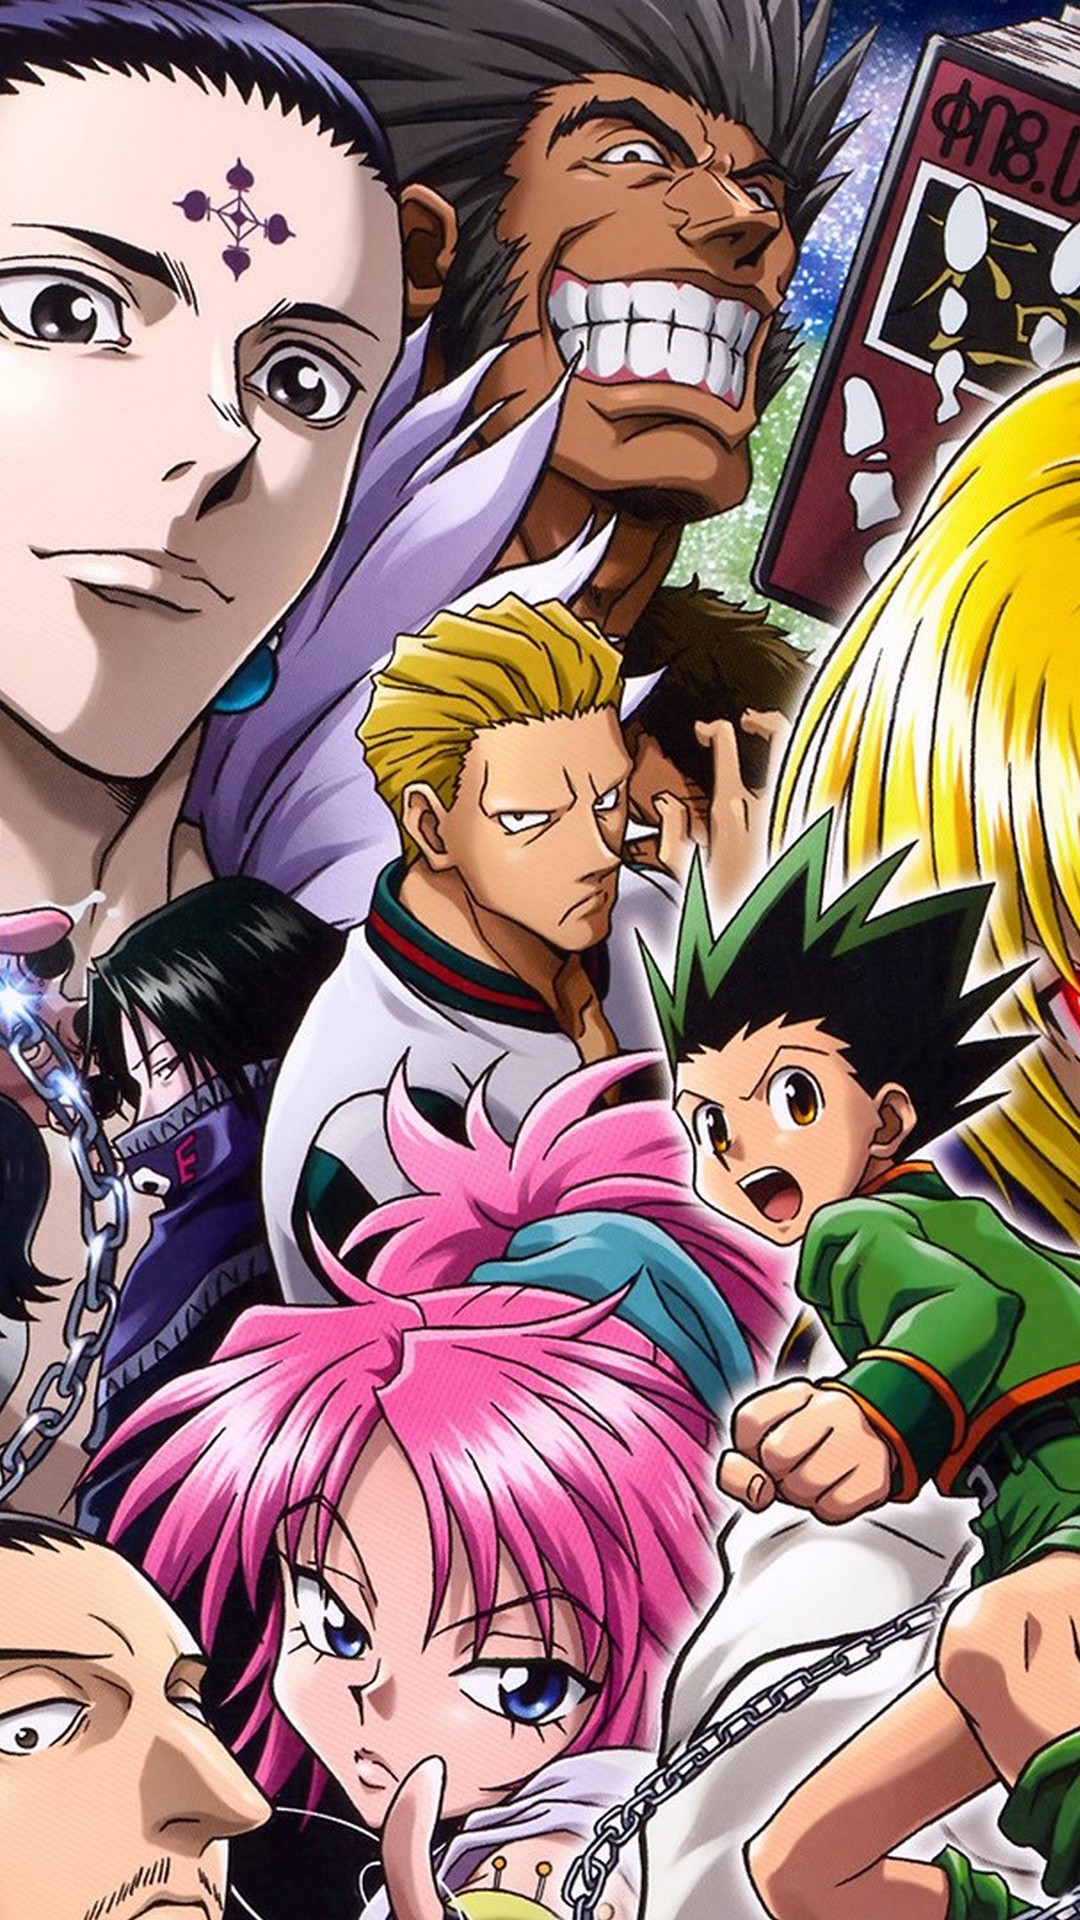 iPhone Wallpaper HD Gon And Killua With high-resolution 1080X1920 pixel. You can use this wallpaper for your iPhone 5, 6, 7, 8, X, XS, XR backgrounds, Mobile Screensaver, or iPad Lock Screen